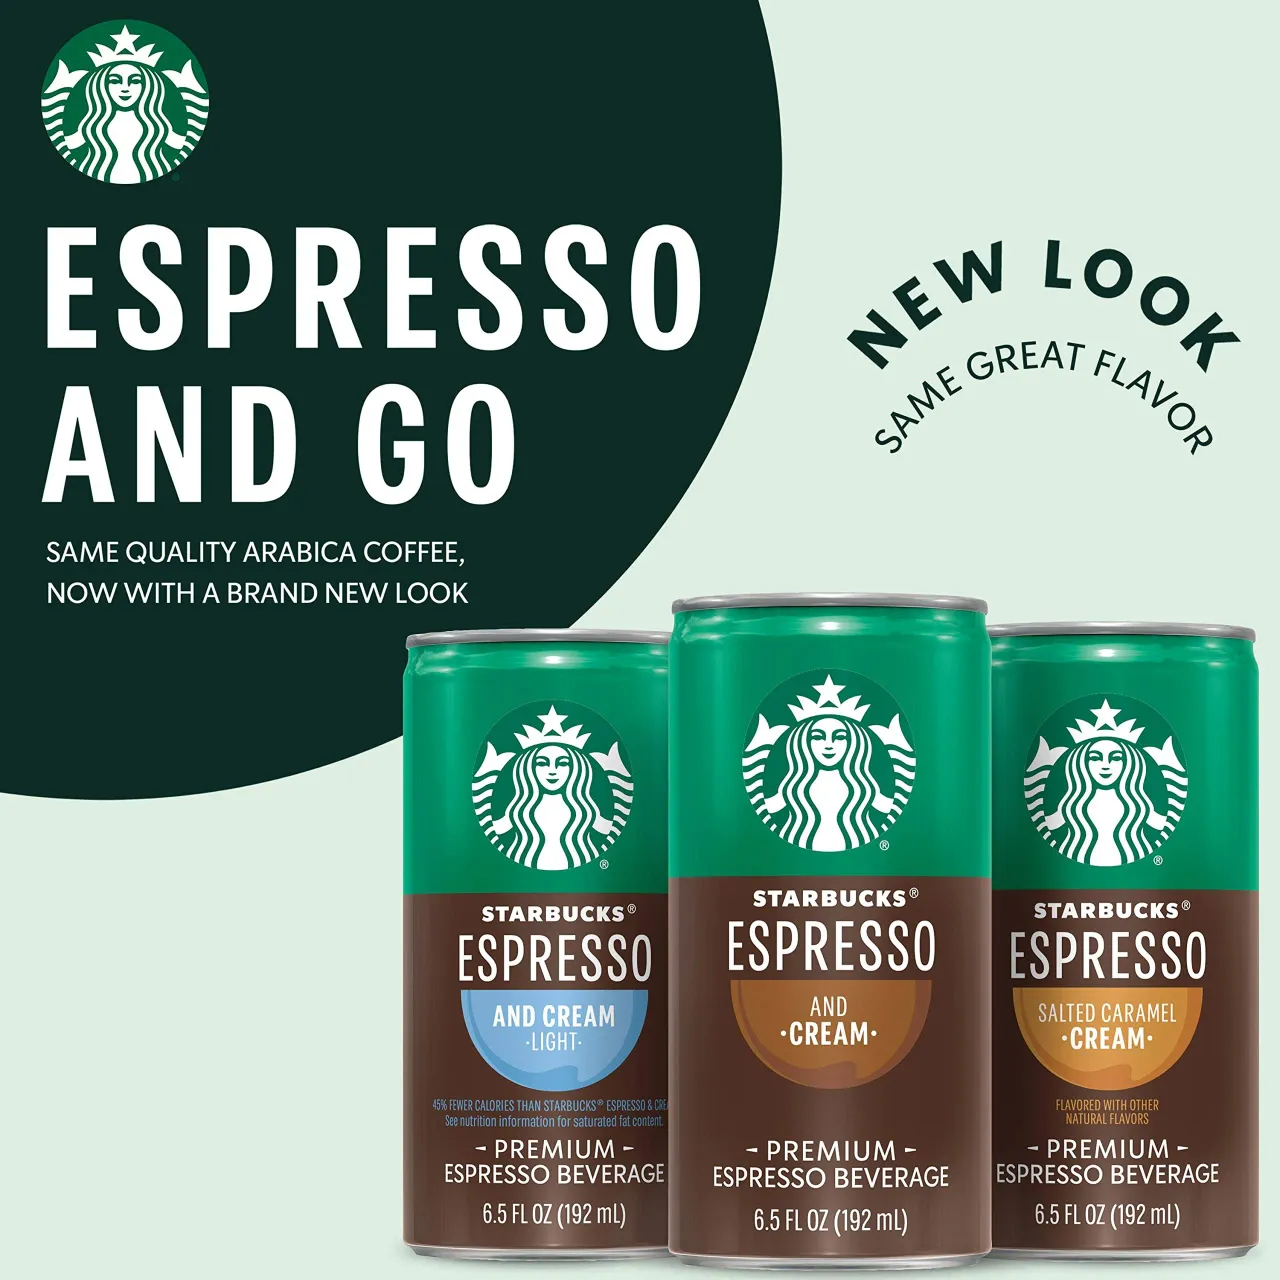 3 Starbucks Ready to Drink Coffee, Espresso & Cream Light , 6.5oz Cans (12 Pack) (Packaging May Vary)